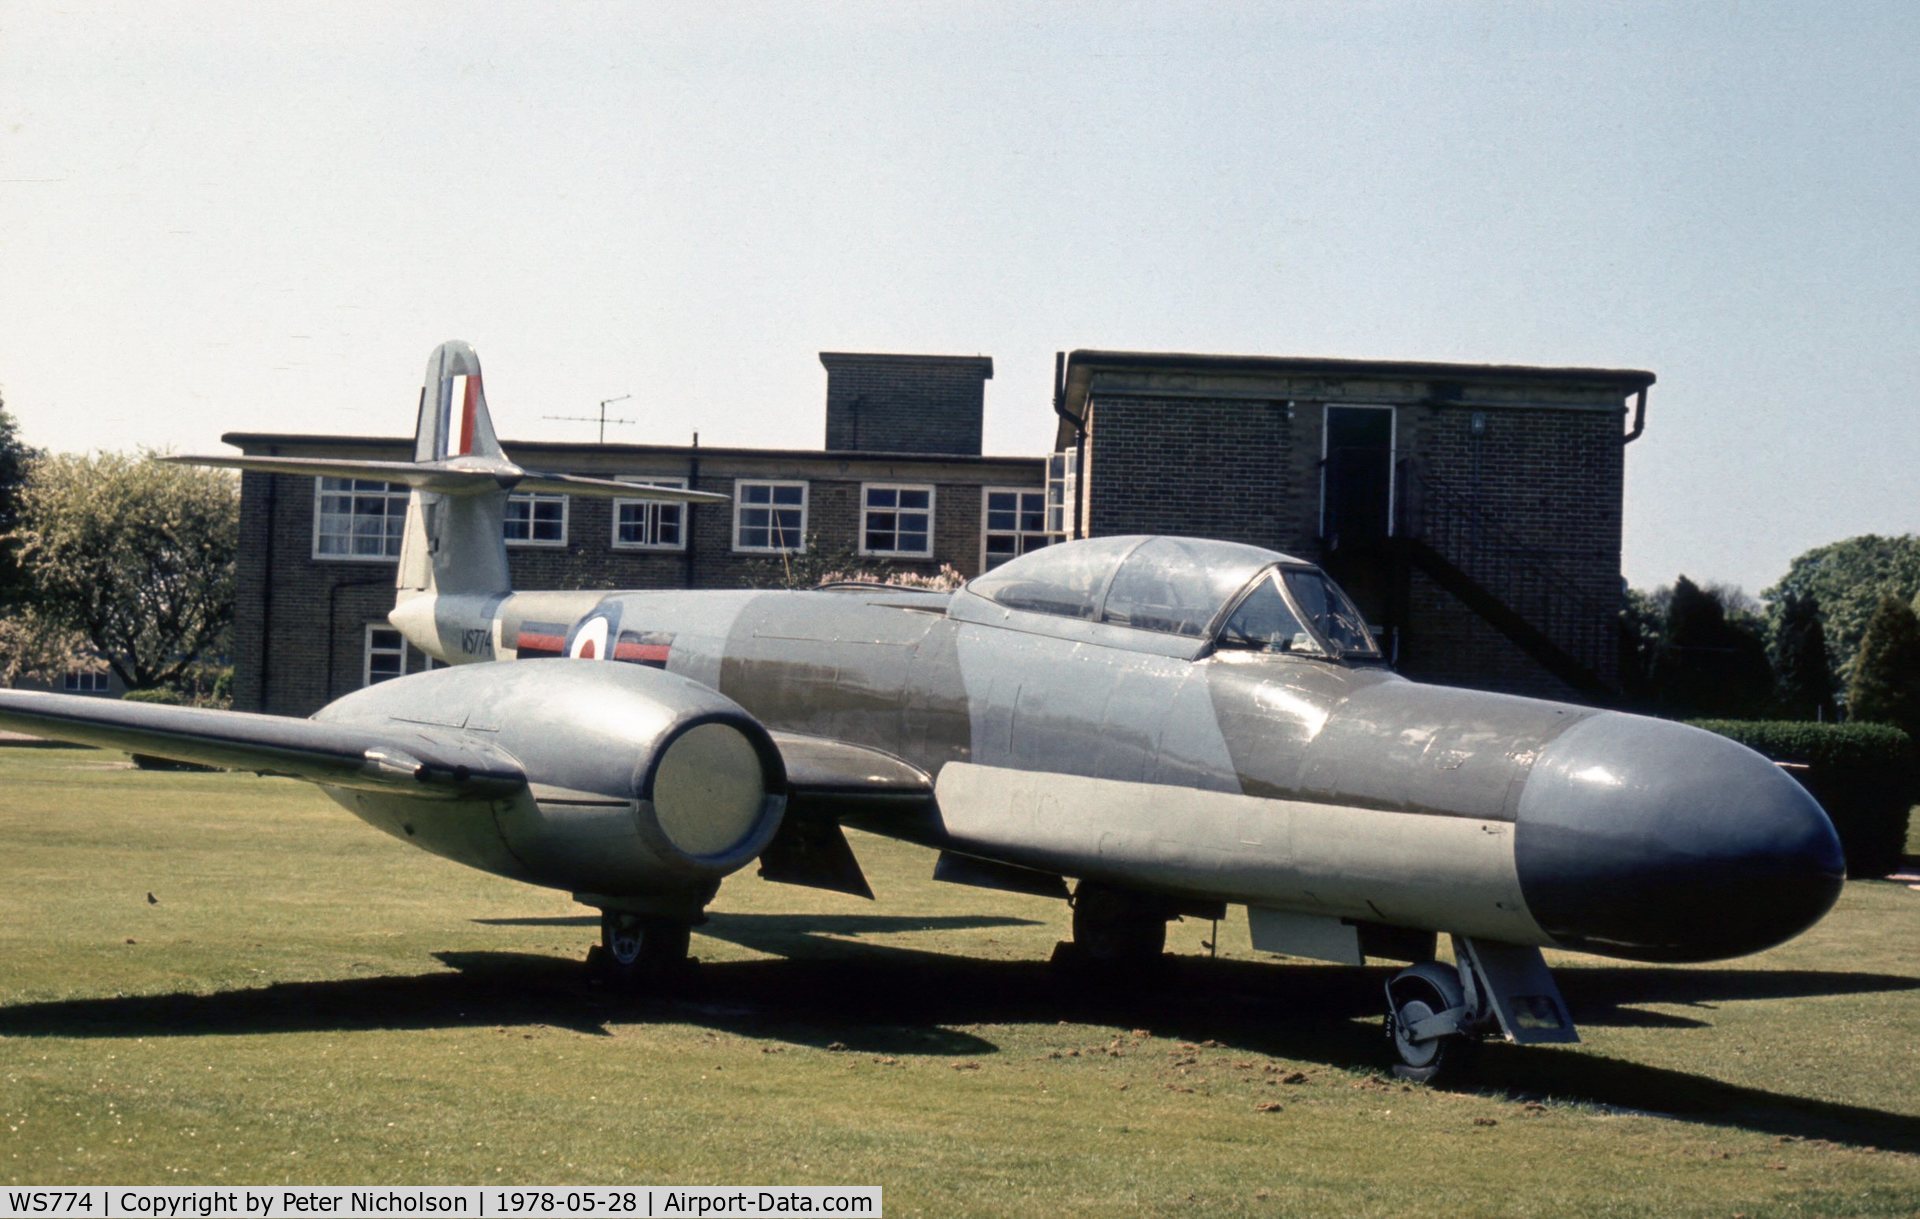 WS774, 1954 Gloster Meteor NF(T).14 C/N Not found WS774, When seen in the Summer of 1978 at the RAF Hospital, Ely this gate guardian was in different markings.